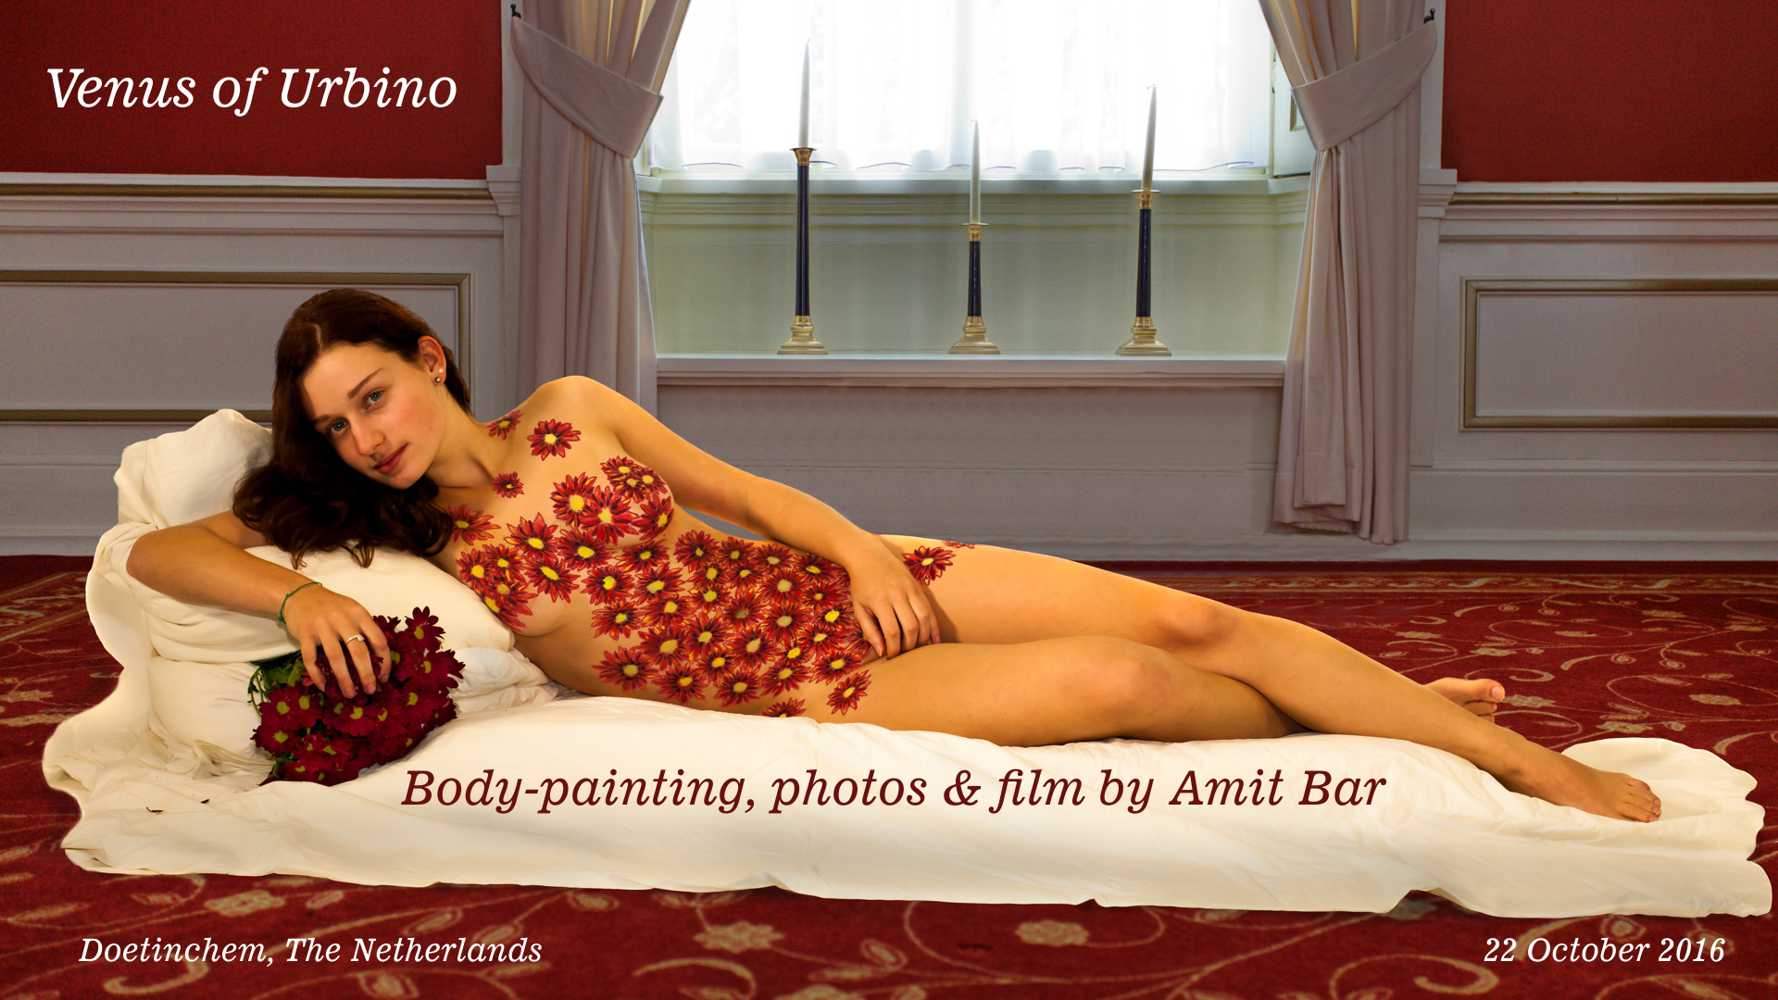 Venus of Urbino video: This modern version of Venus has been decorated with body-painting of the the flowers which she holds in her hand.